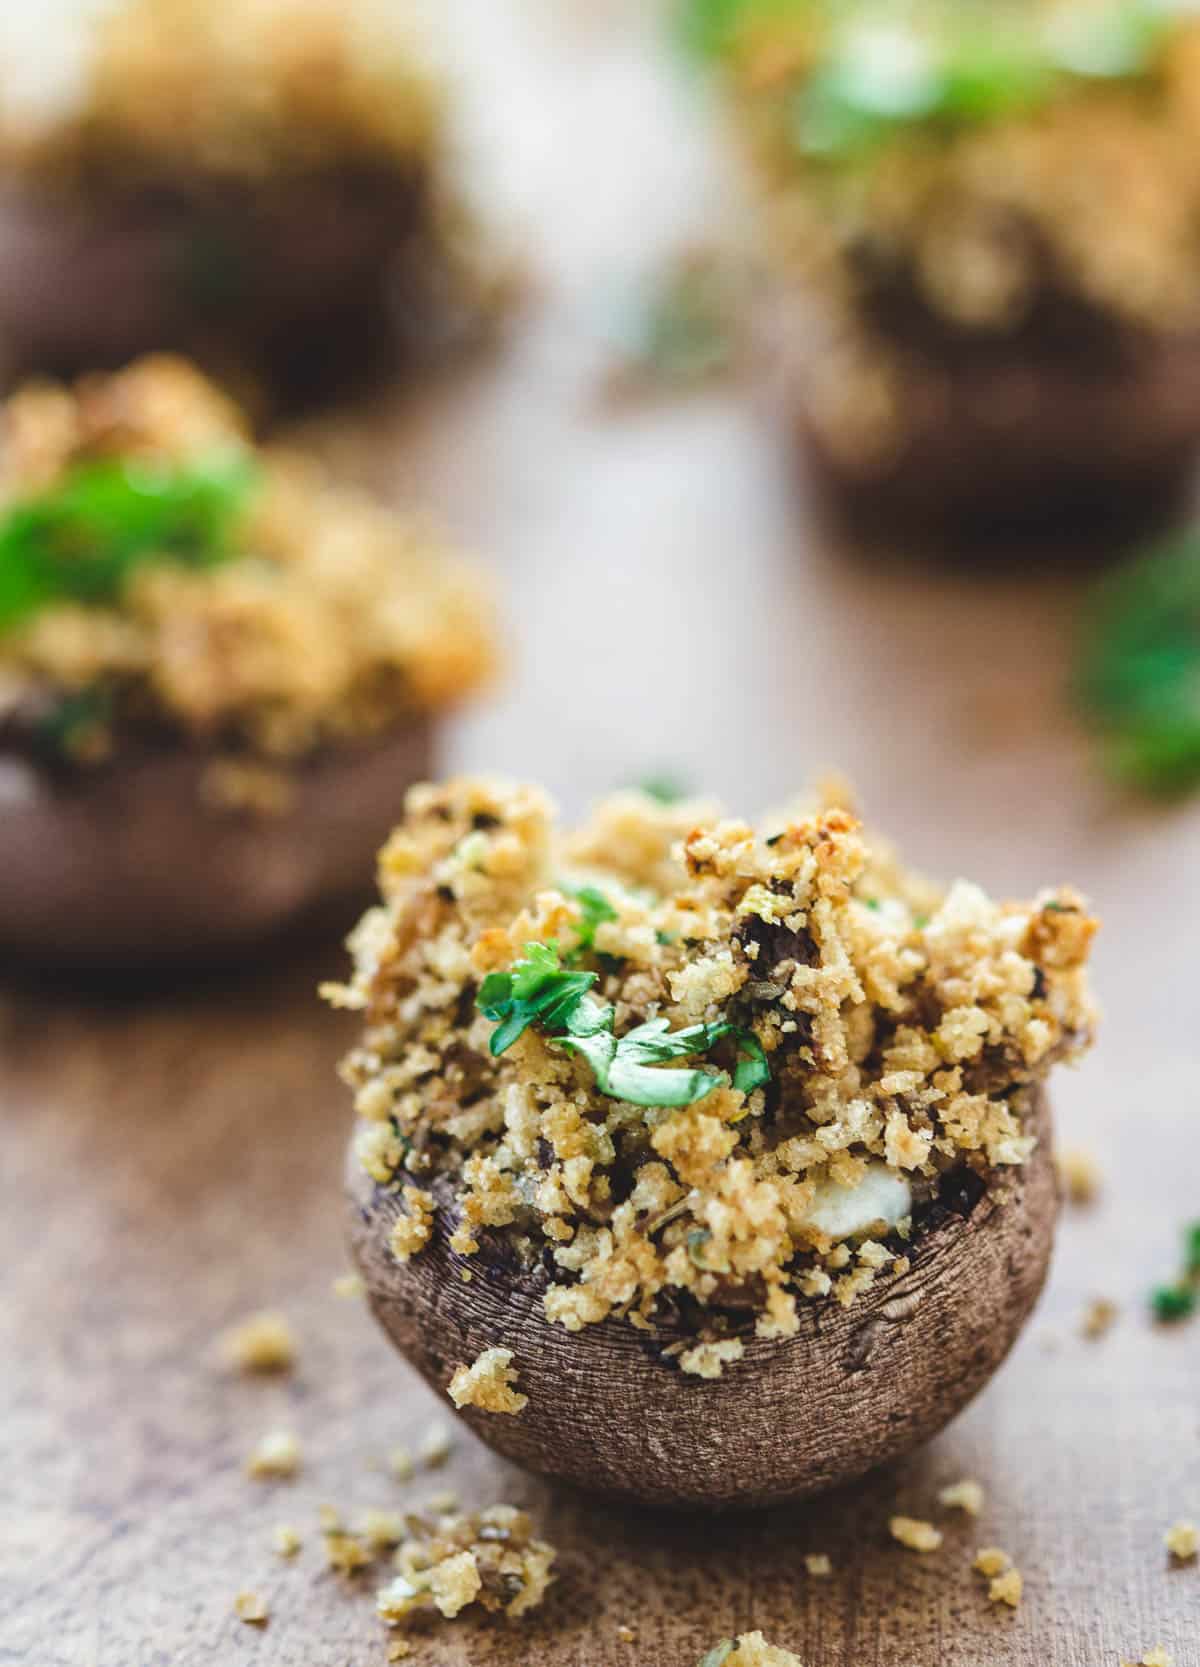 mushroom stuffed with breadcrumbs topped with parsley